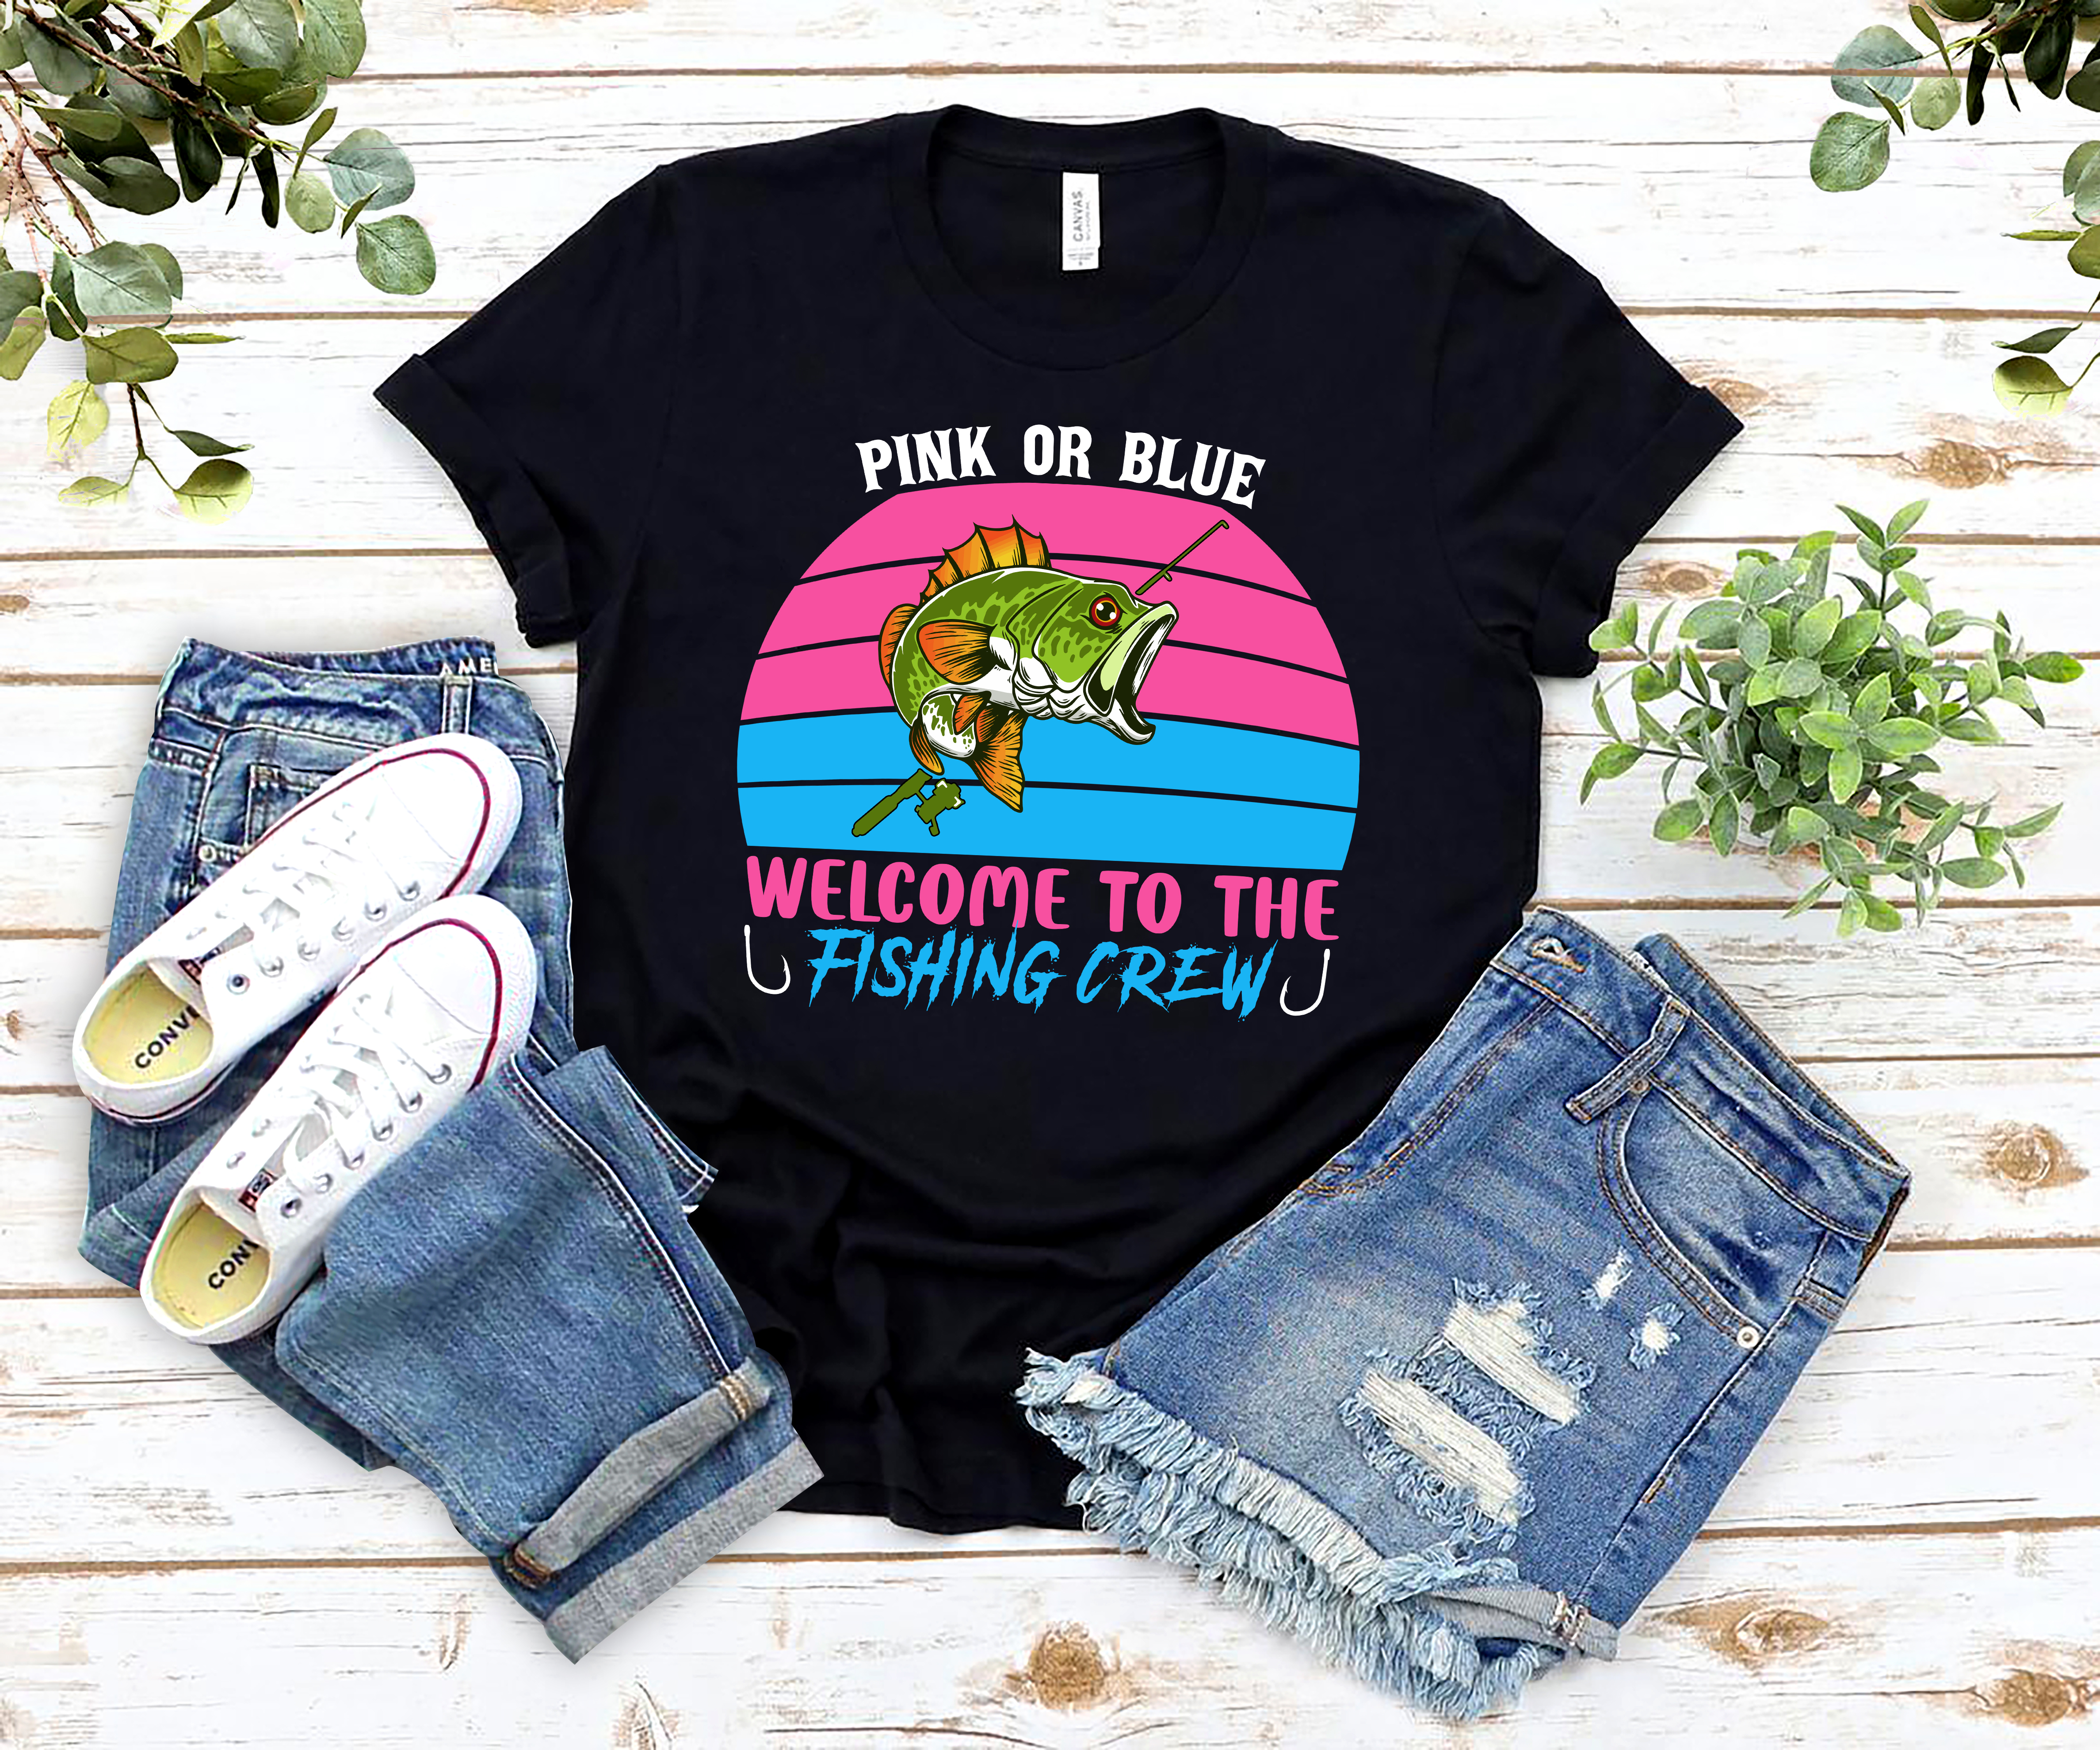 https://www.buytshirtdesigns.net/wp-content/uploads/2023/04/RD-Pink-Or-Blue-Welcome-To-The-Fishing-Crew-Funny-Gender-Reveal-T-Shirt.-.jpg